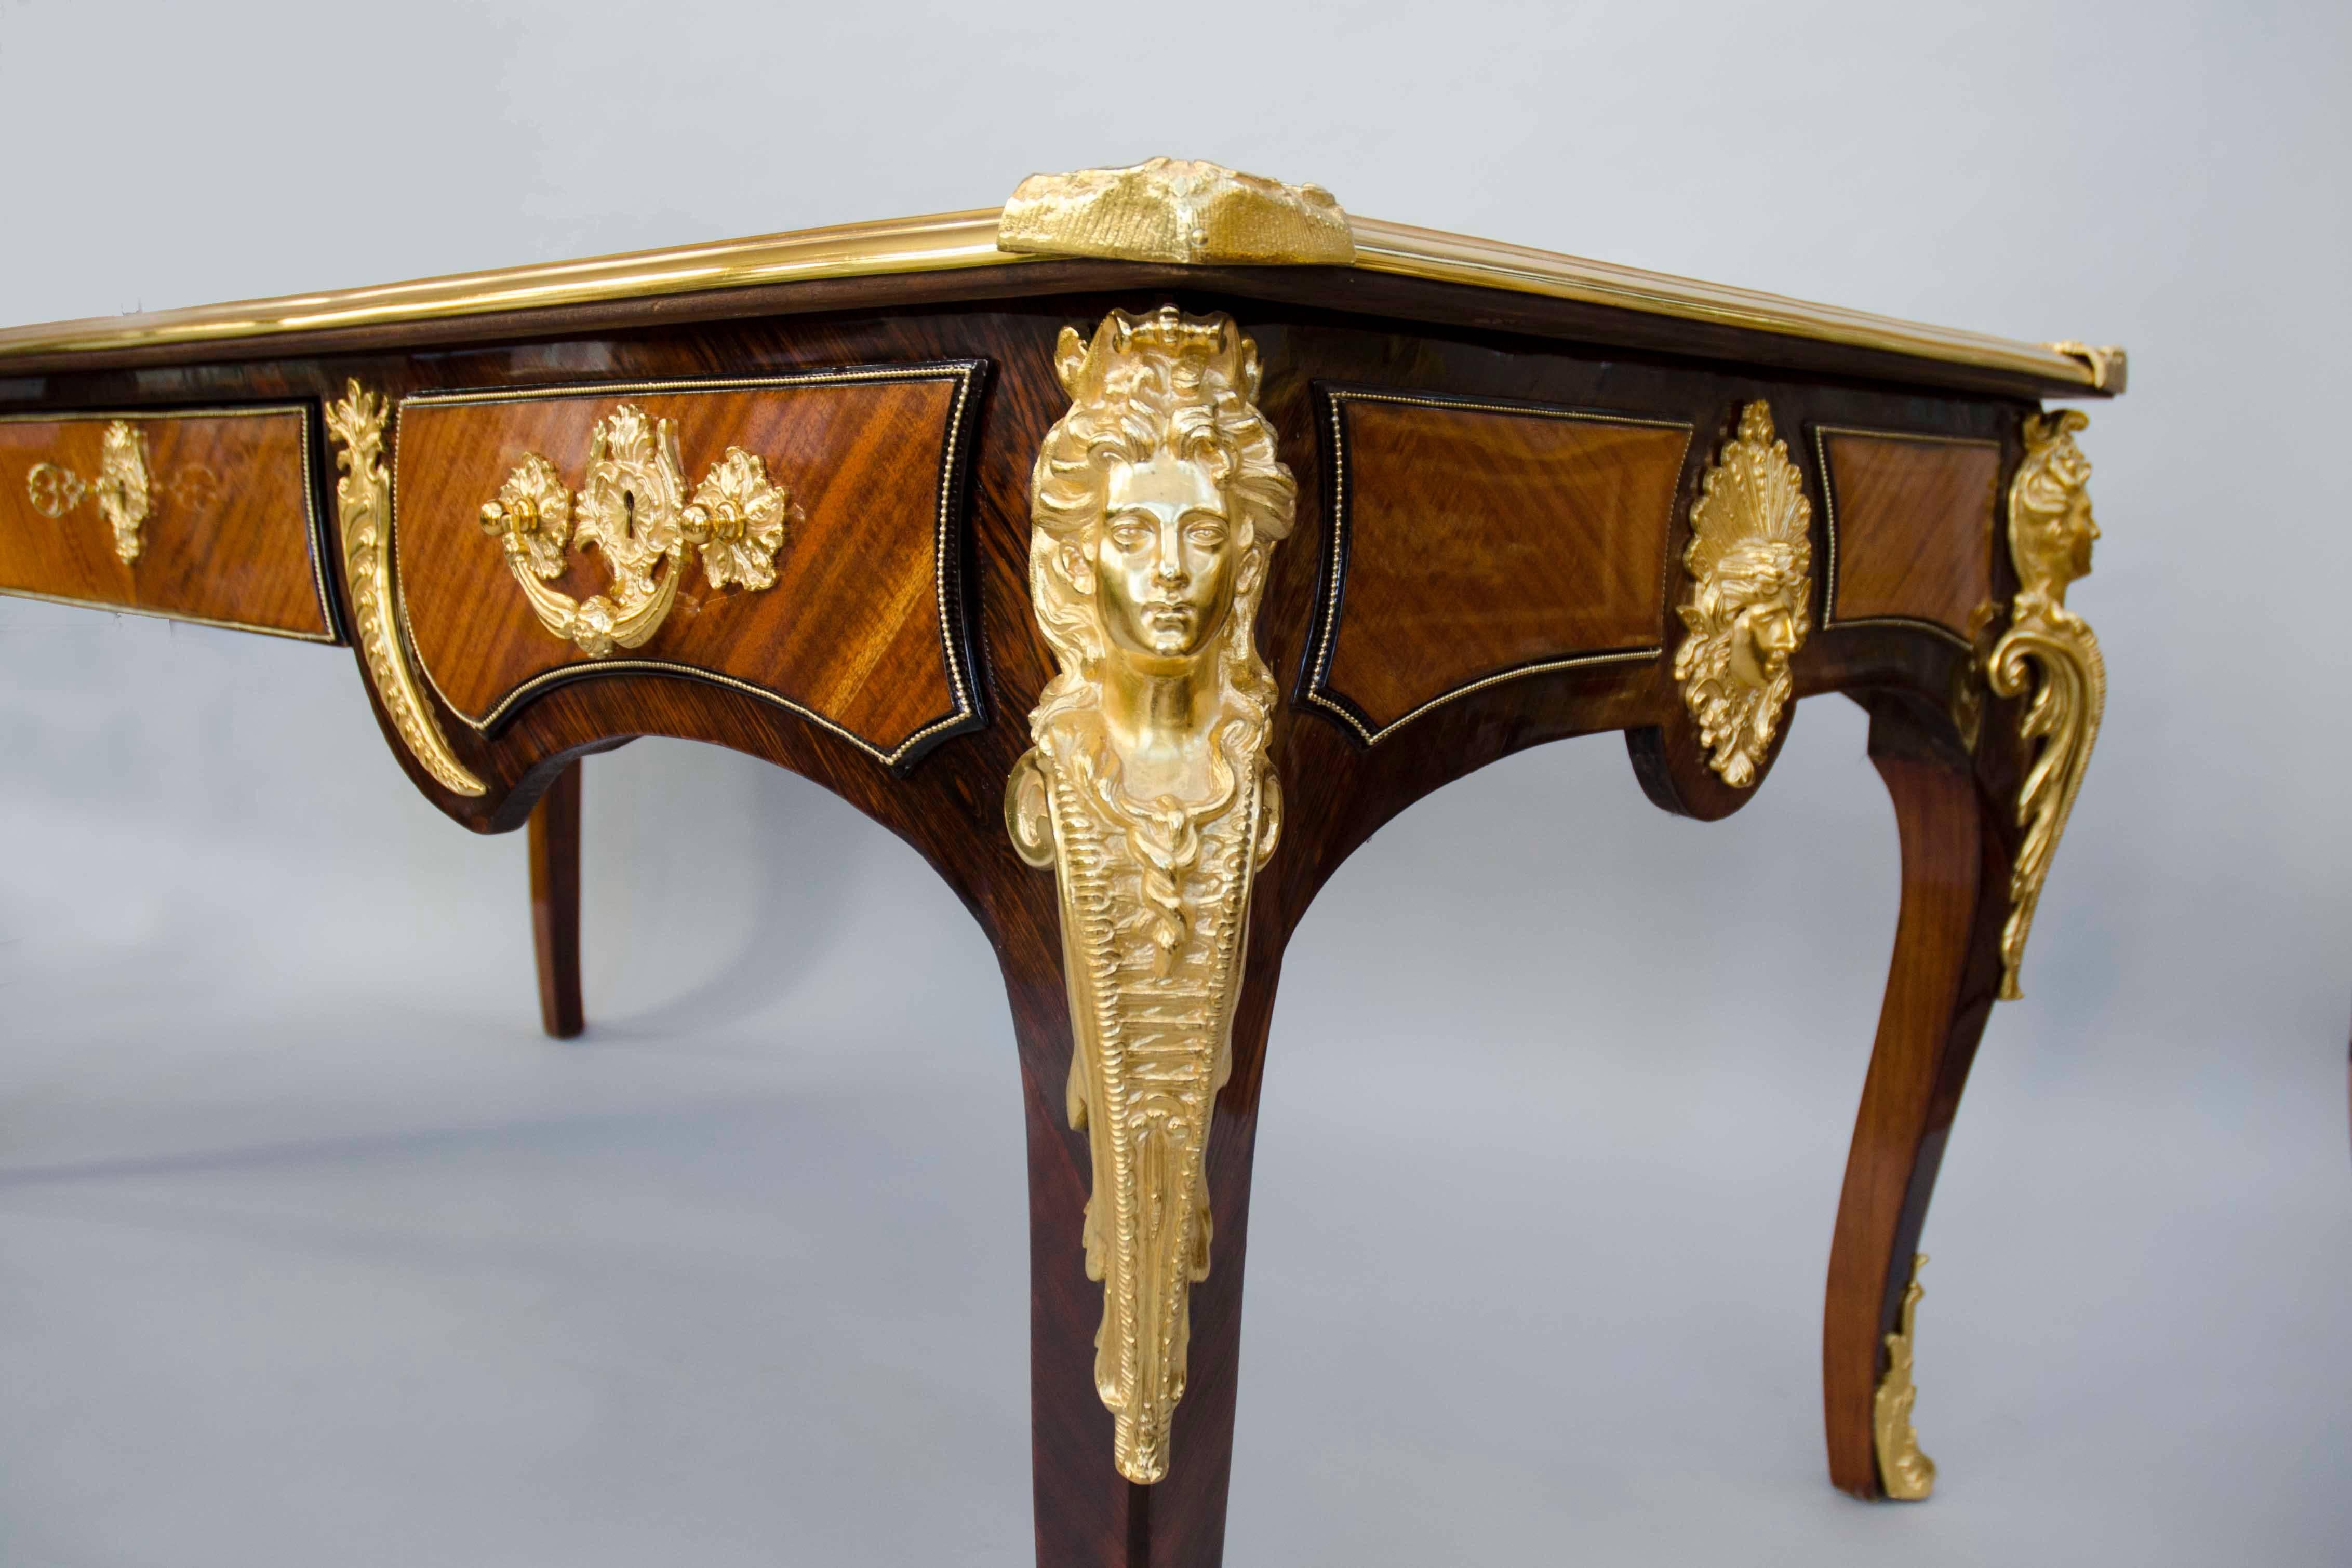 Gilt 19th Century French Regency Style Rose and Kingwood Office Desk, after Cressent